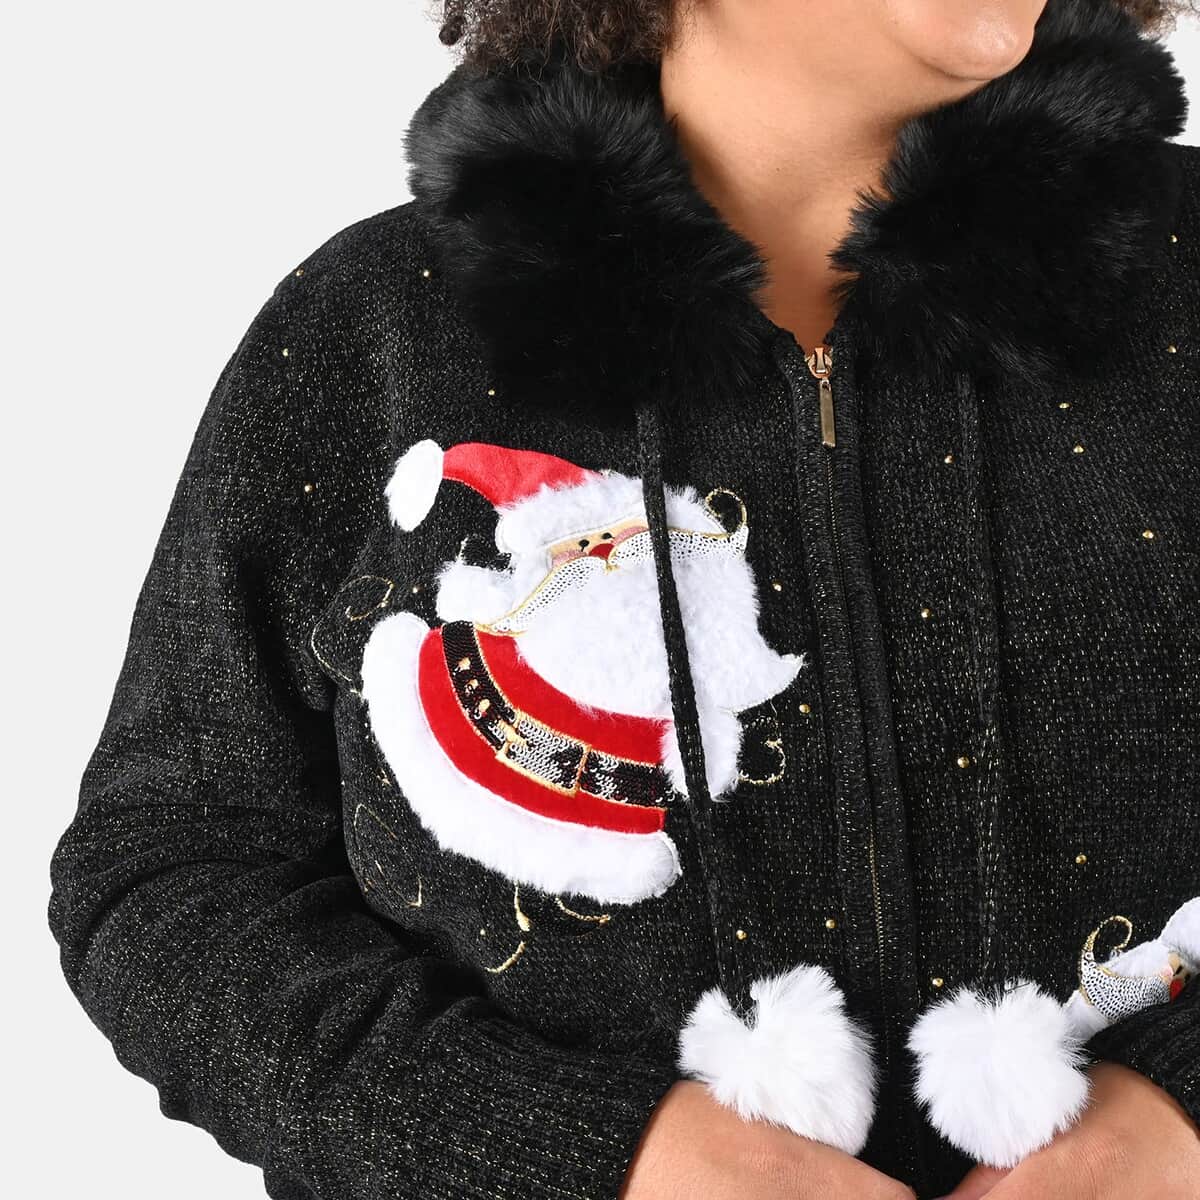 Tamsy Black Santa Christmas Sweater with Removable Fur Trim - 3X image number 5